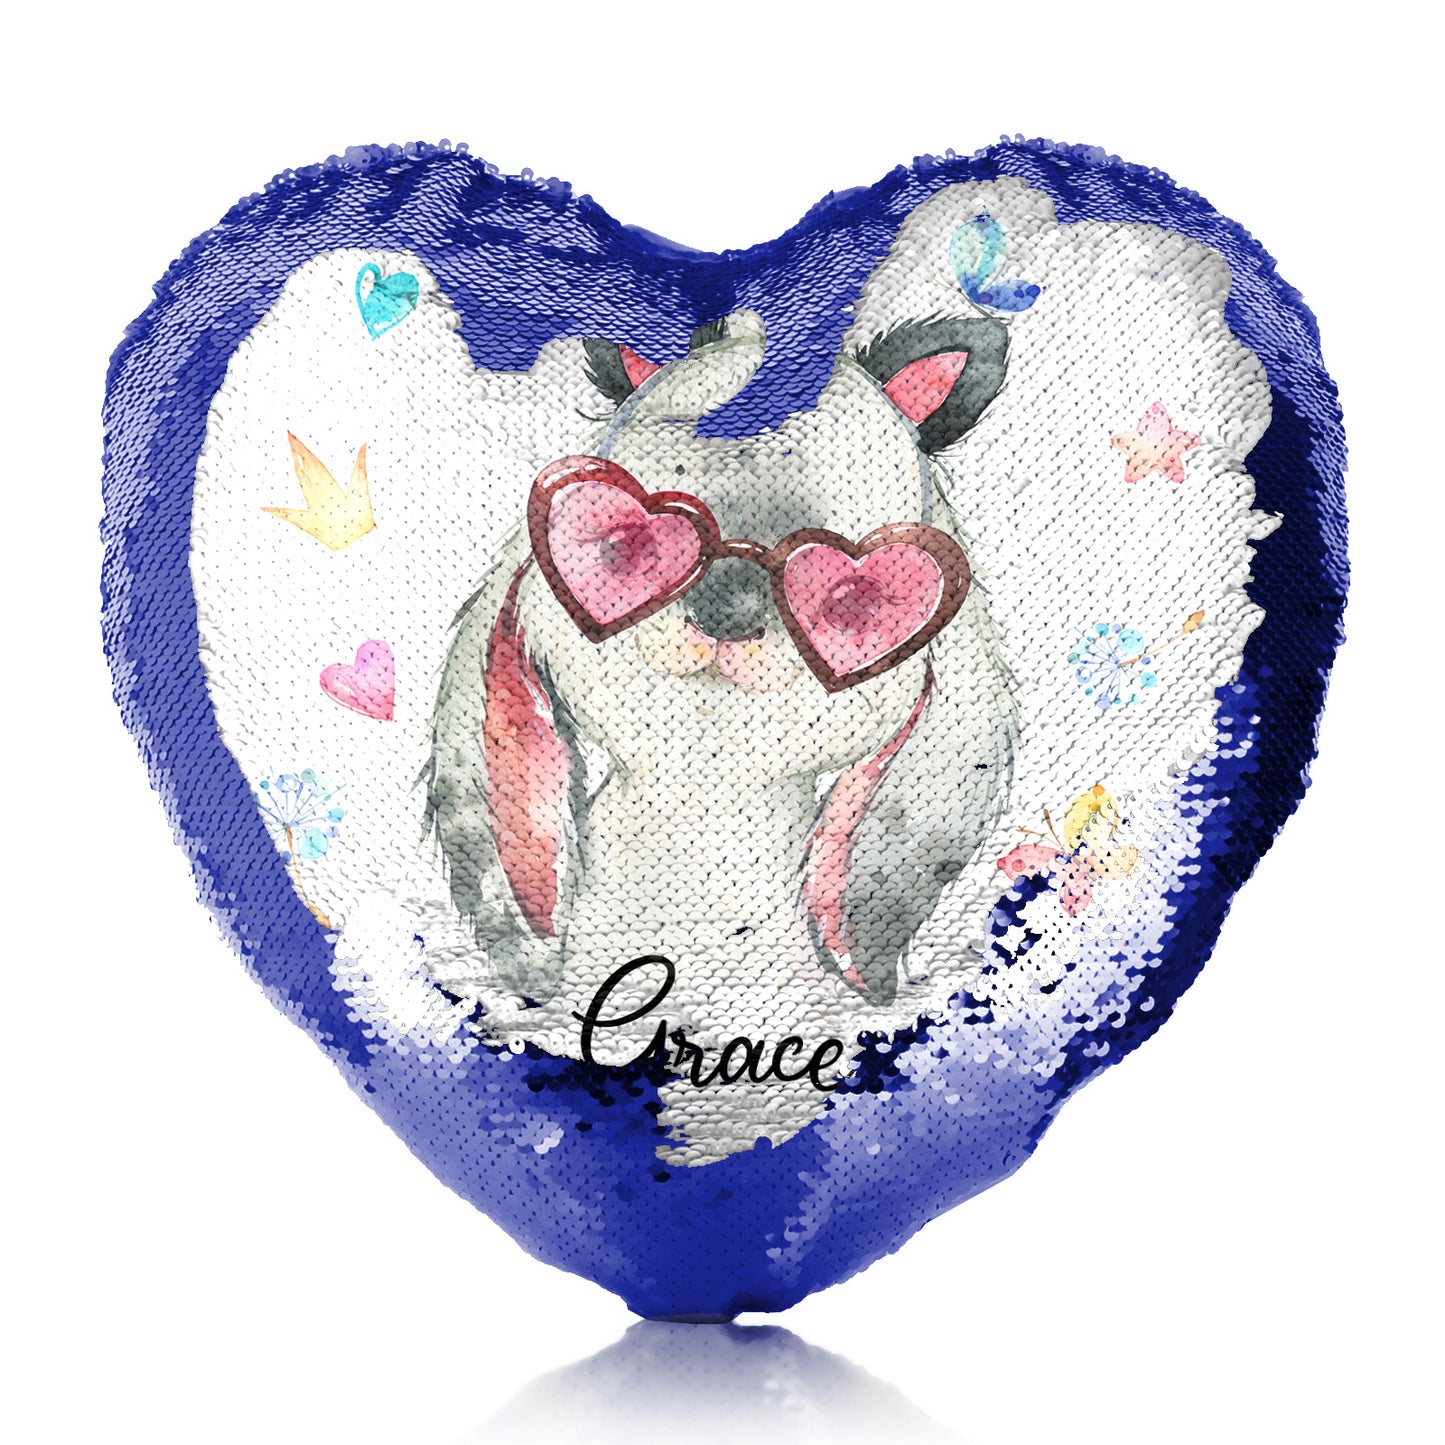 Personalised Sequin Heart Cushion with Grey Rabbit with Cat ears and Pink Heart Glasses and Cute Text